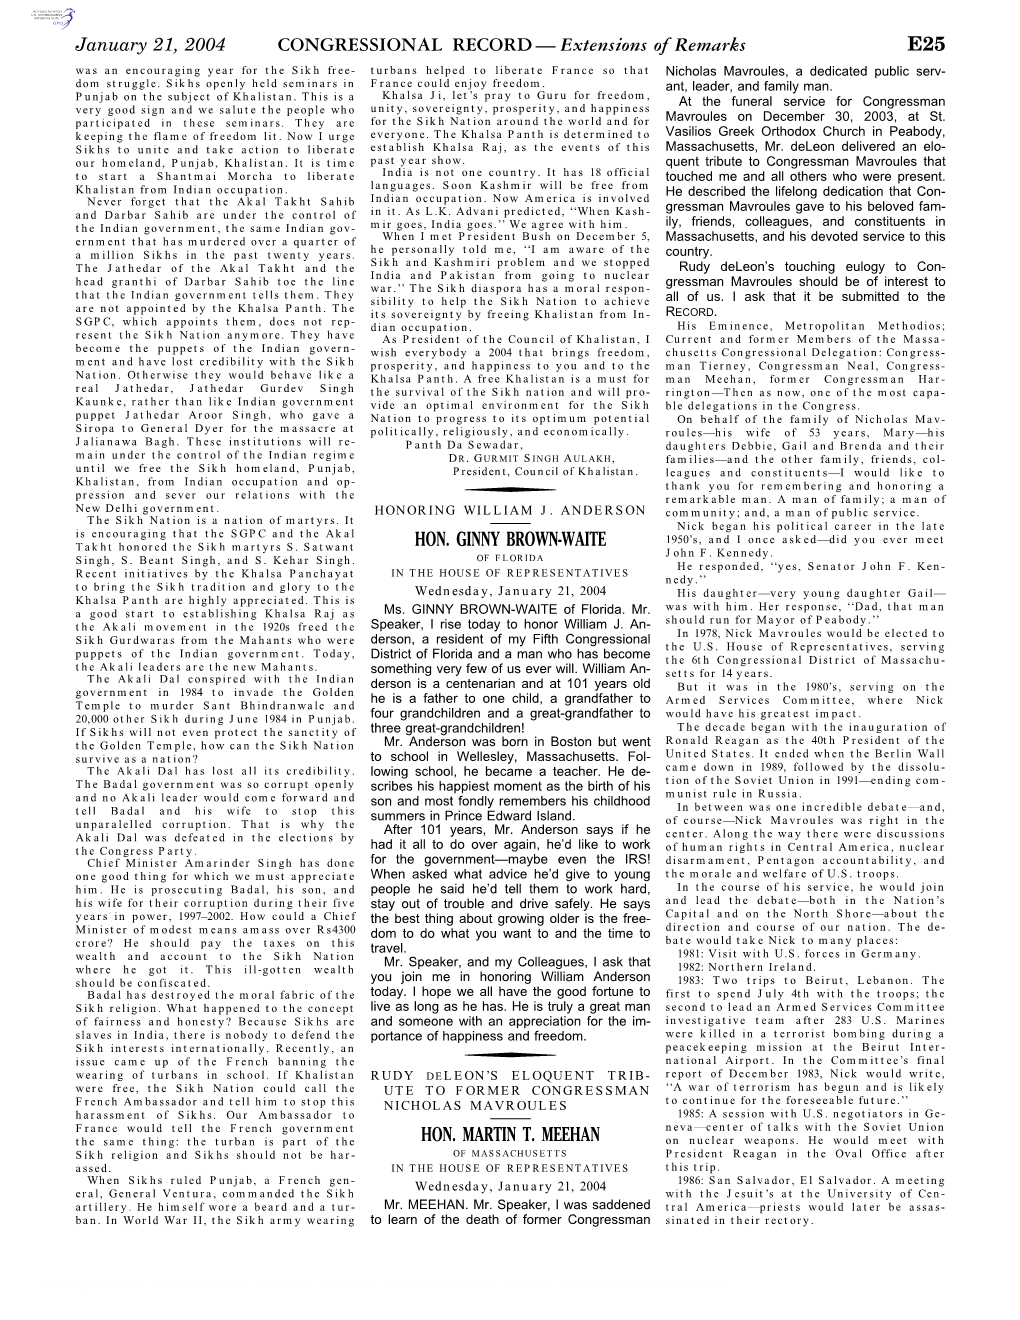 CONGRESSIONAL RECORD— Extensions of Remarks E25 HON. GINNY BROWN-WAITE HON. MARTIN T. MEEHAN